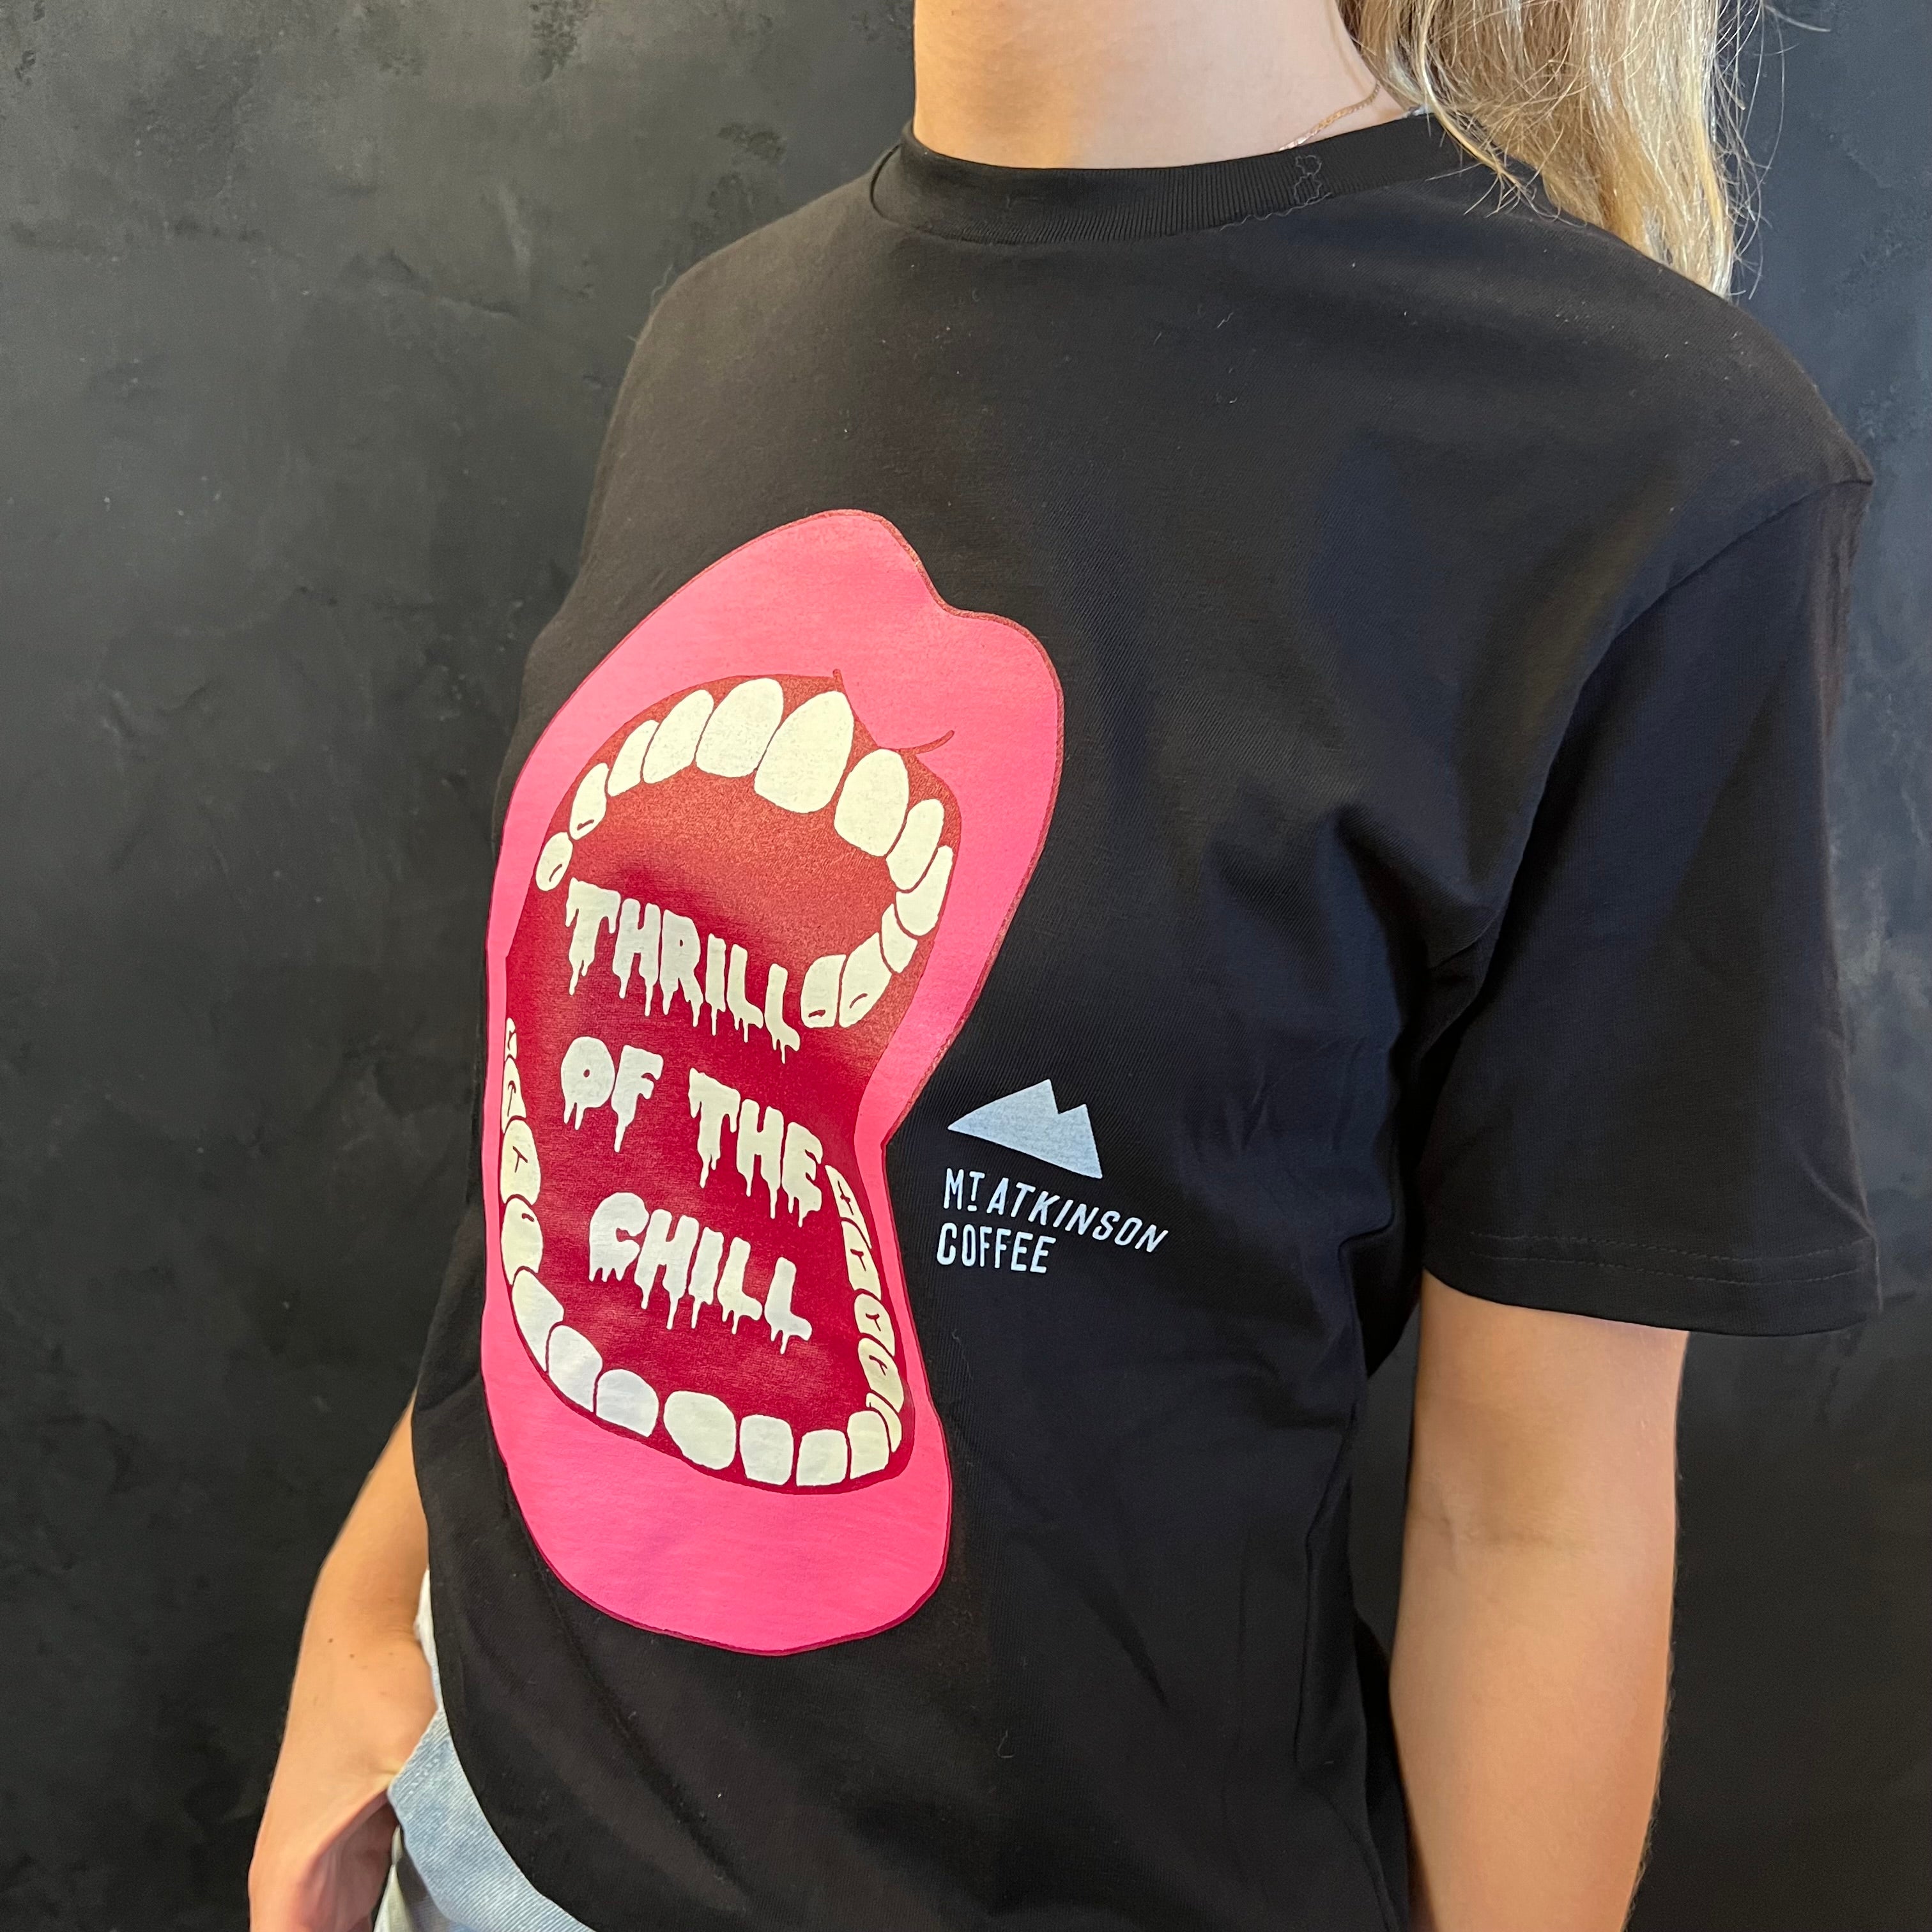 Thrill of the chill tee